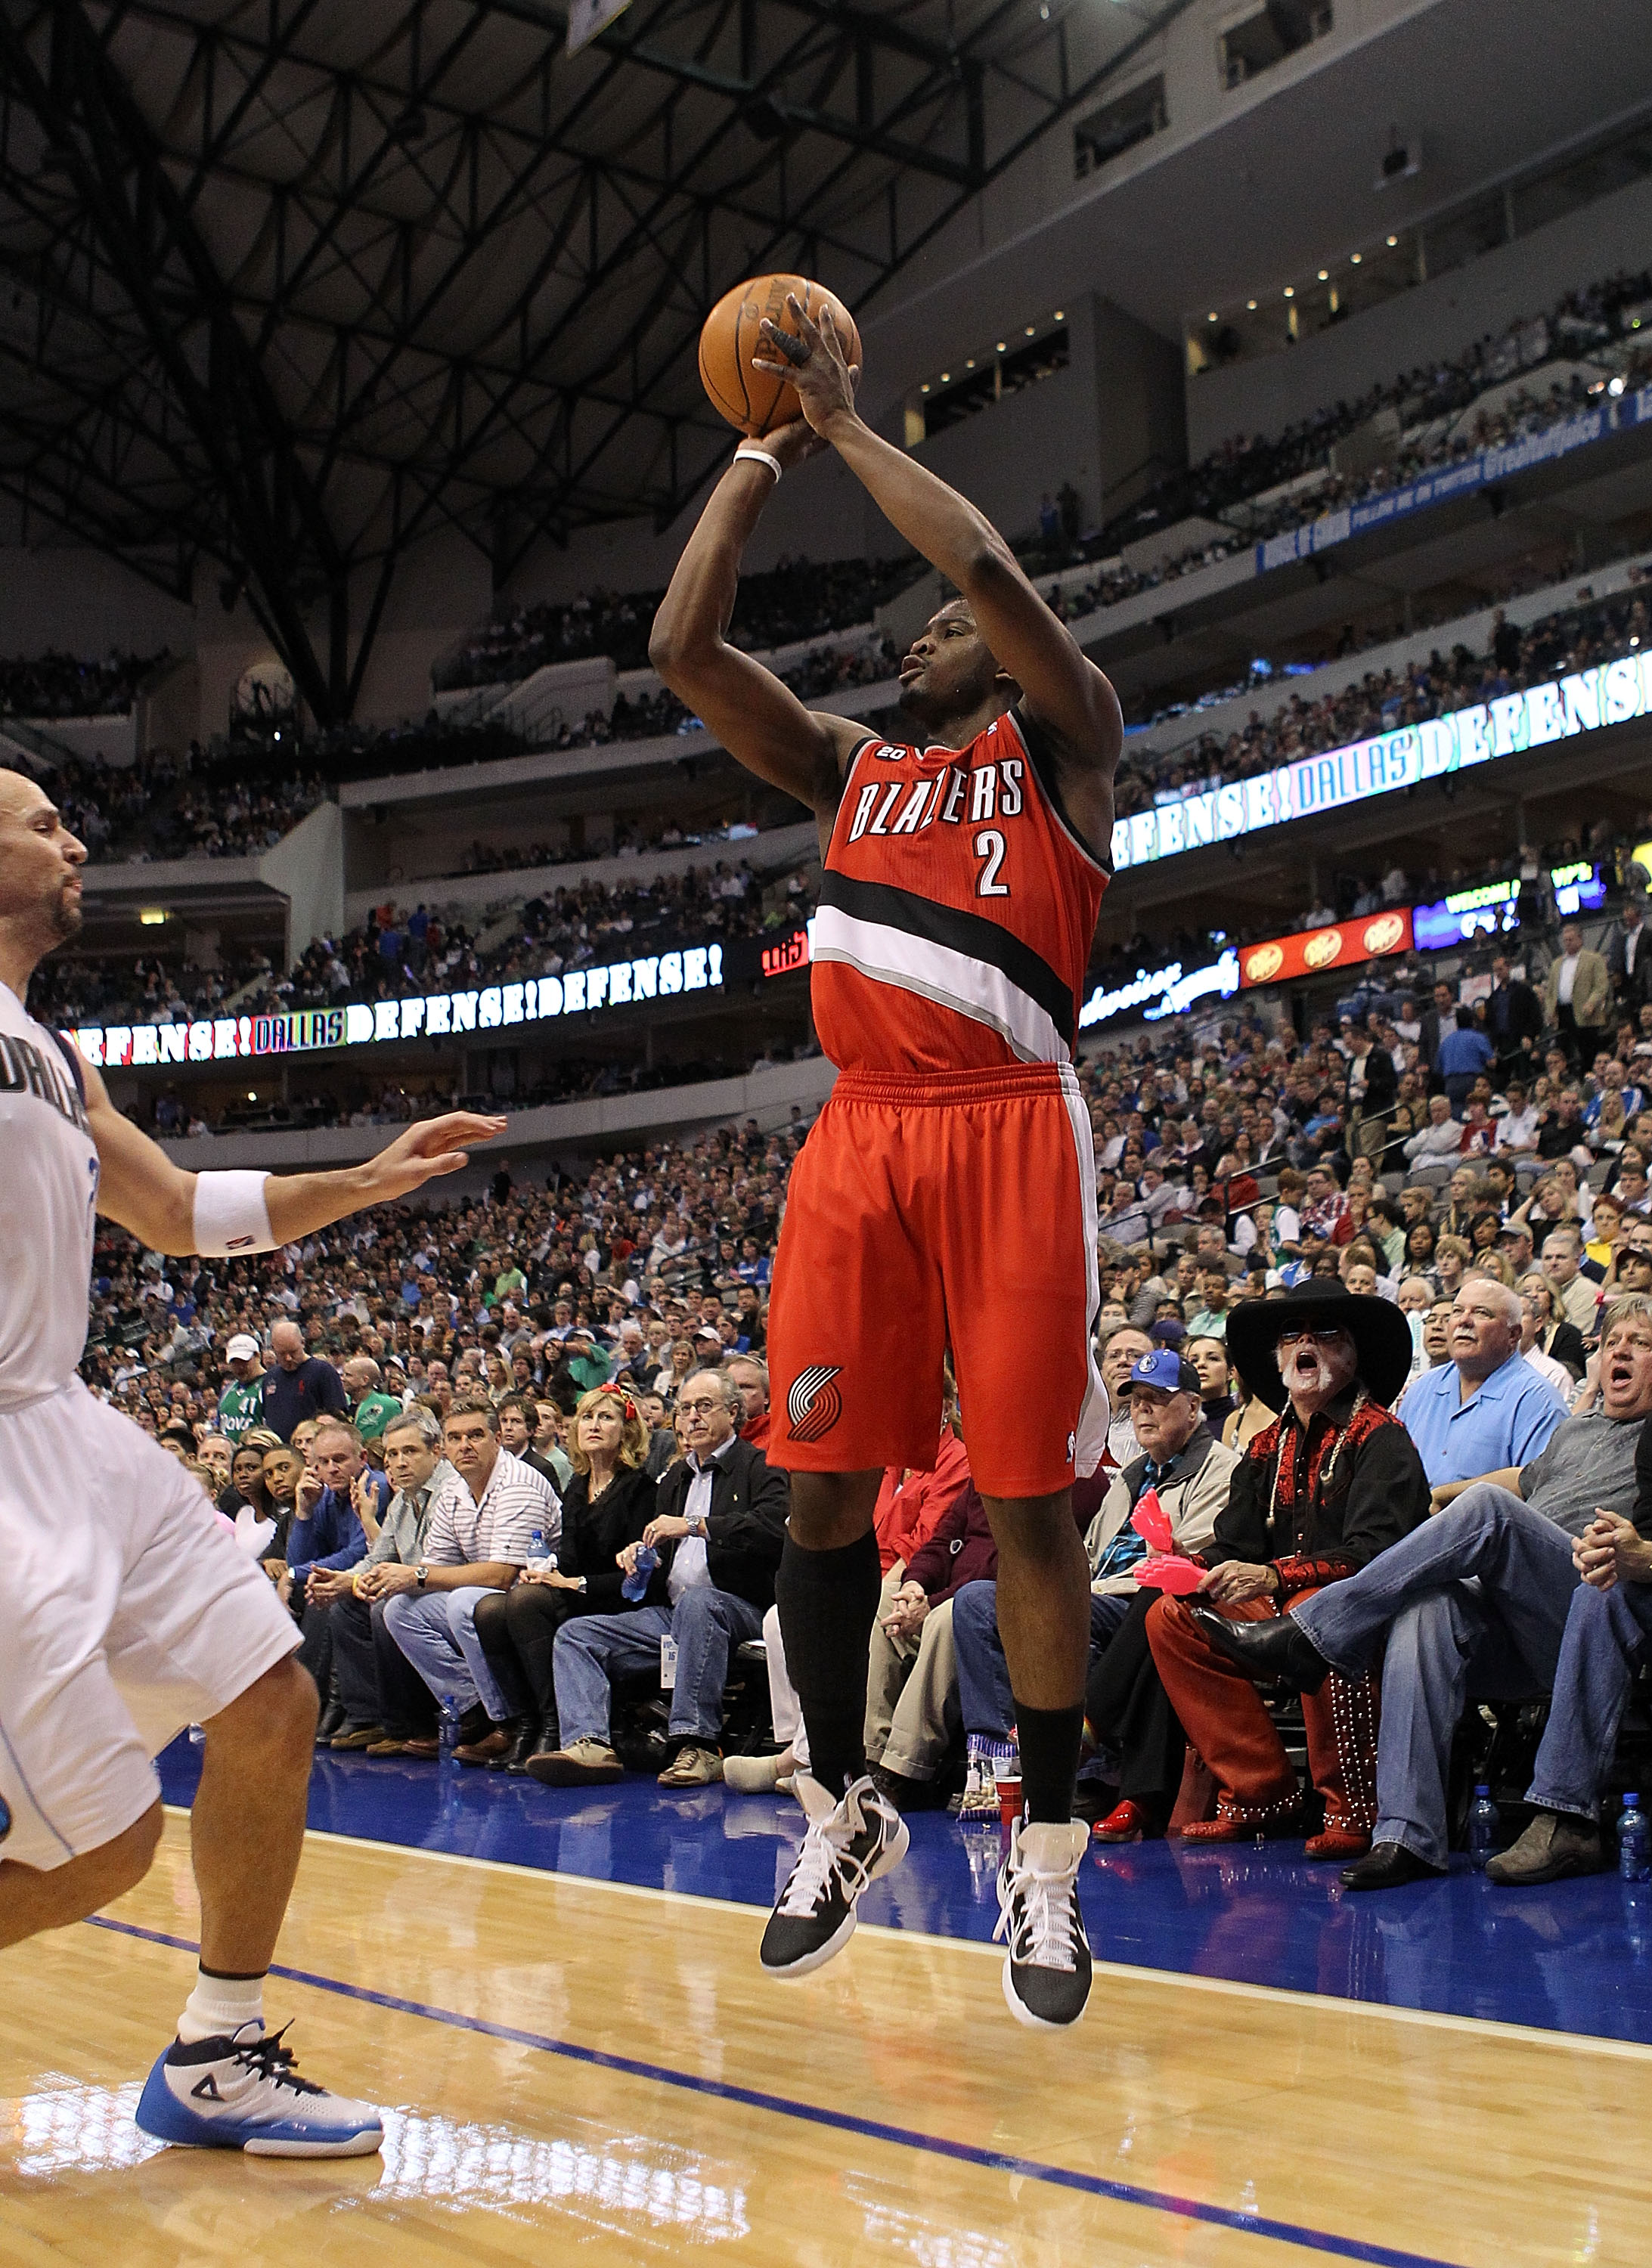 DALLAS, TX - DECEMBER 15:  Guard Wesley Matthews #2 of the Portland Trail Blazers takes a shot against the Dallas Mavericks at American Airlines Center on December 15, 2010 in Dallas, Texas.  NOTE TO USER: User expressly acknowledges and agrees that, by d